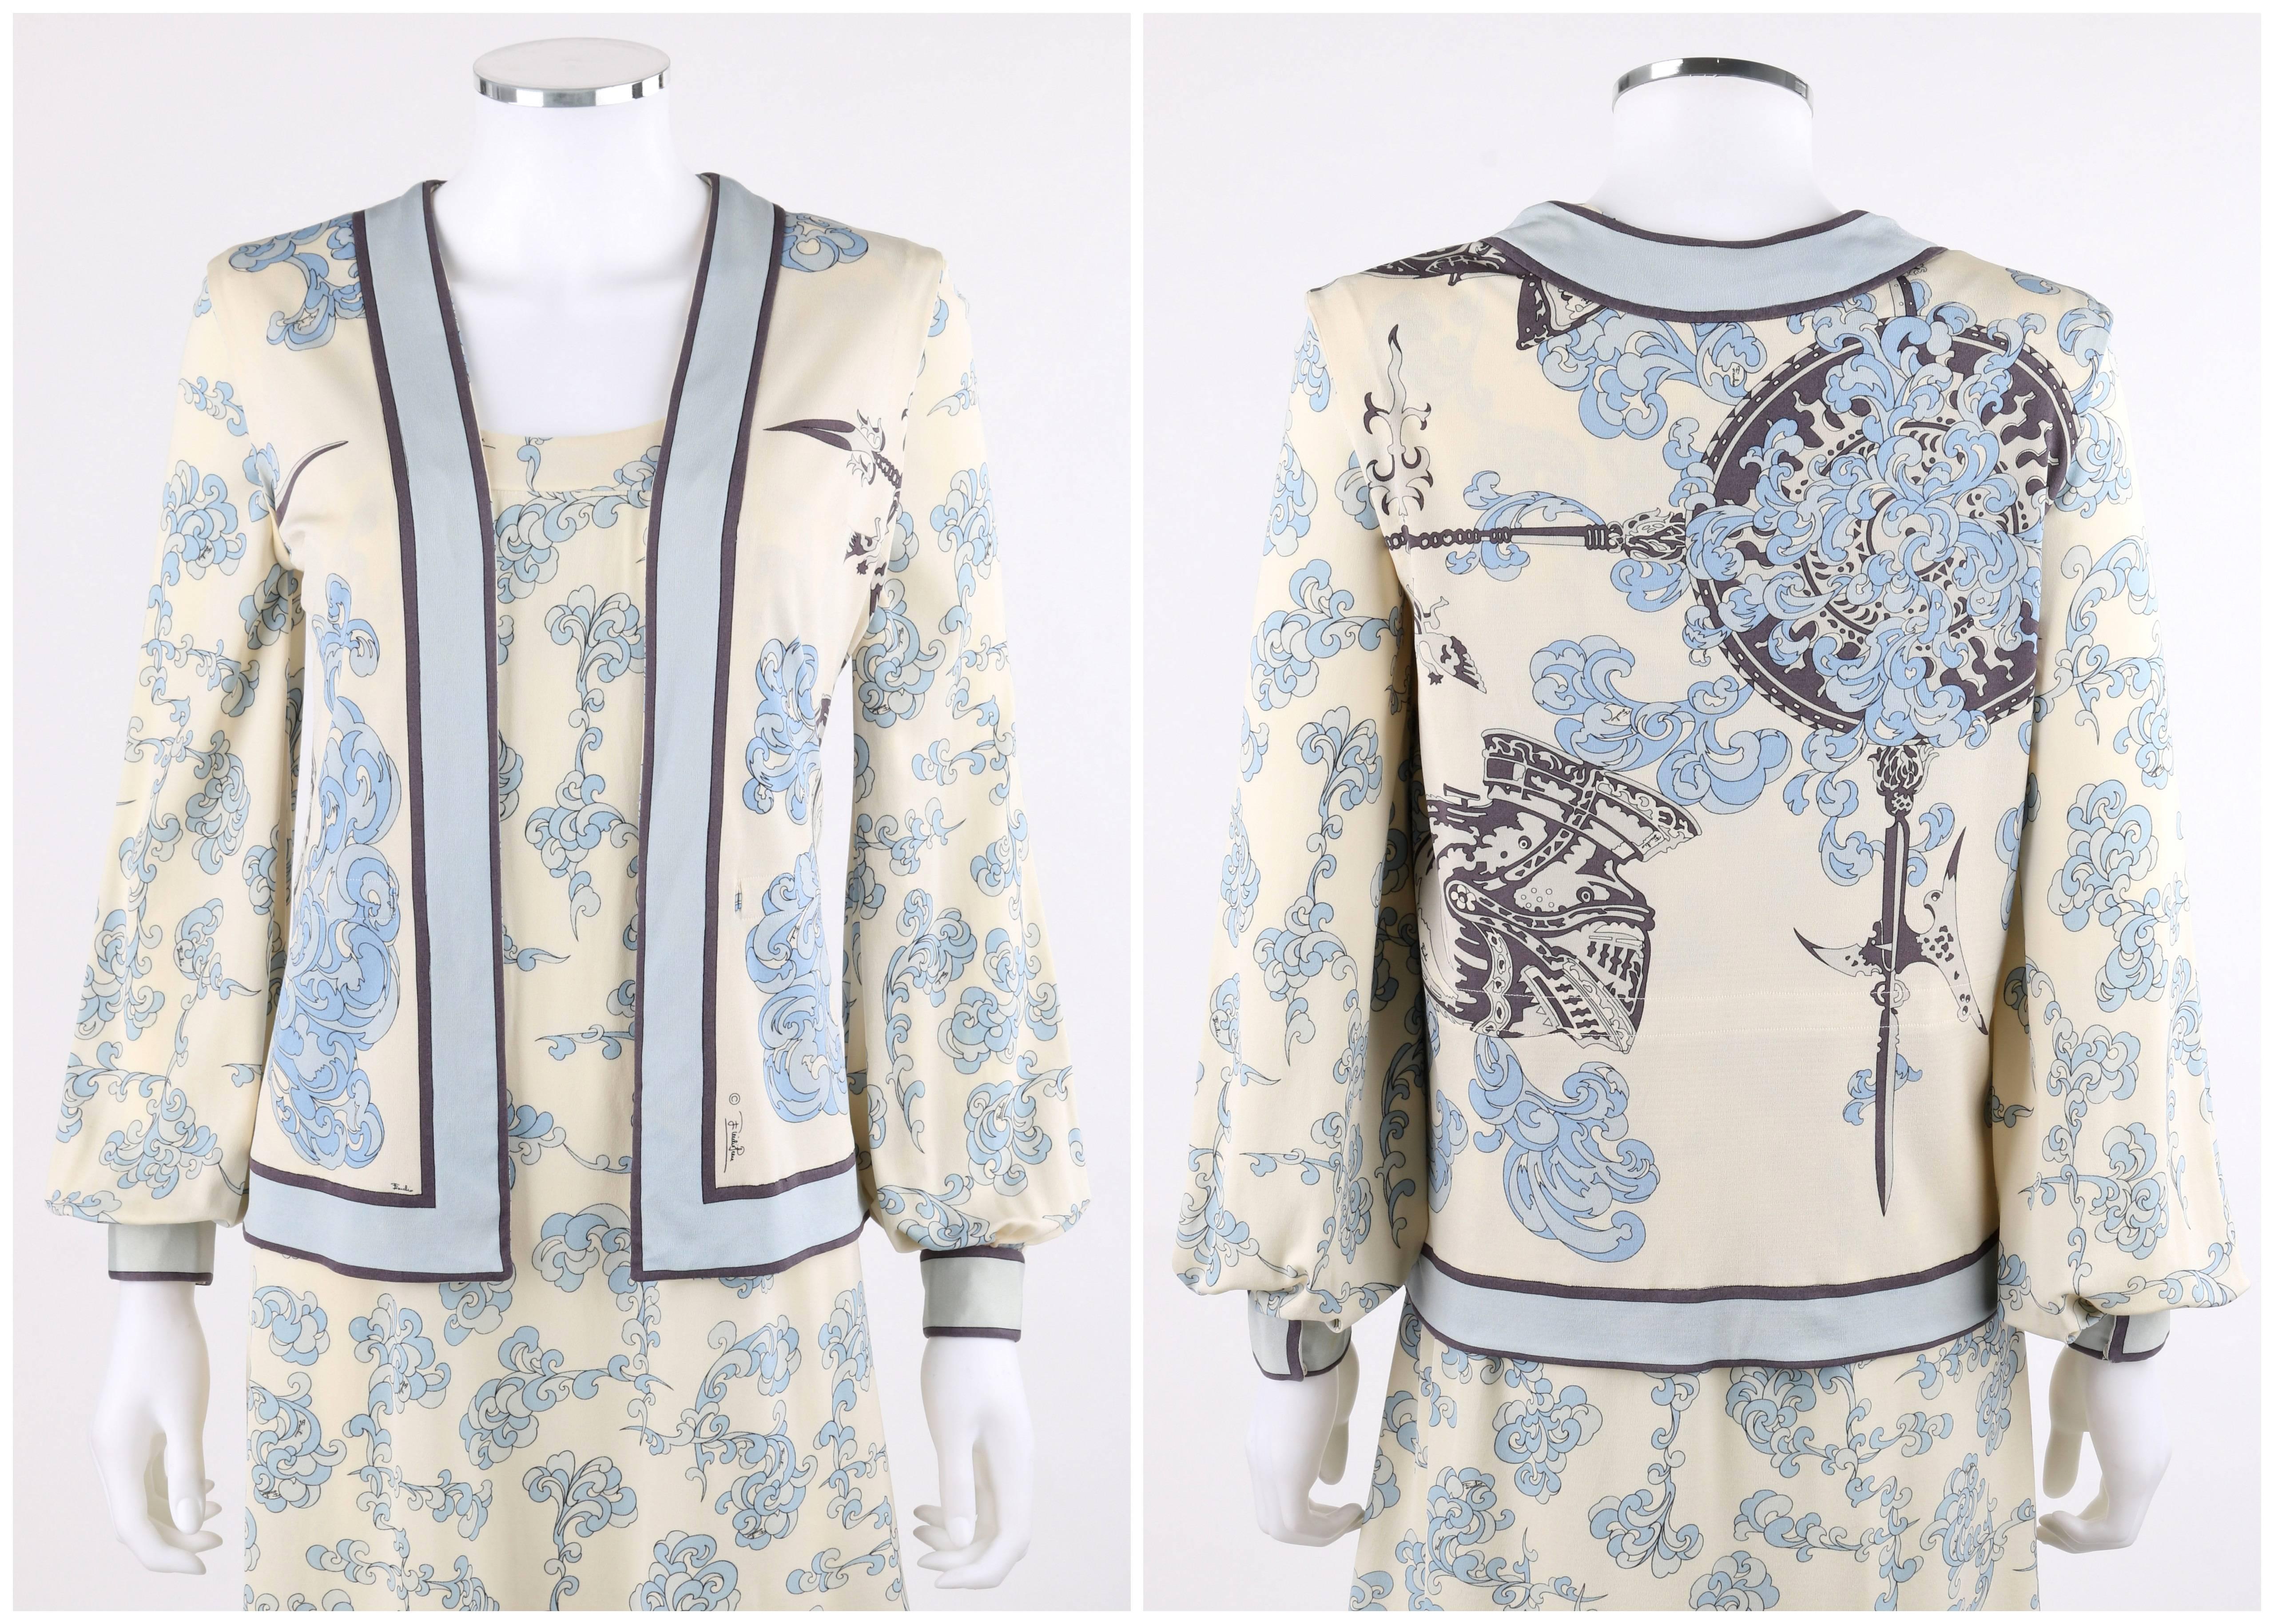 Vintage Emilio Pucci c.1970's two piece signature print silk jersey knit vest baby doll dress set. Abstract plume / feather and medieval armor print silk jersey knit in shades of off white, blue, and gray. Scoop neckline babydoll dress. Long bishop